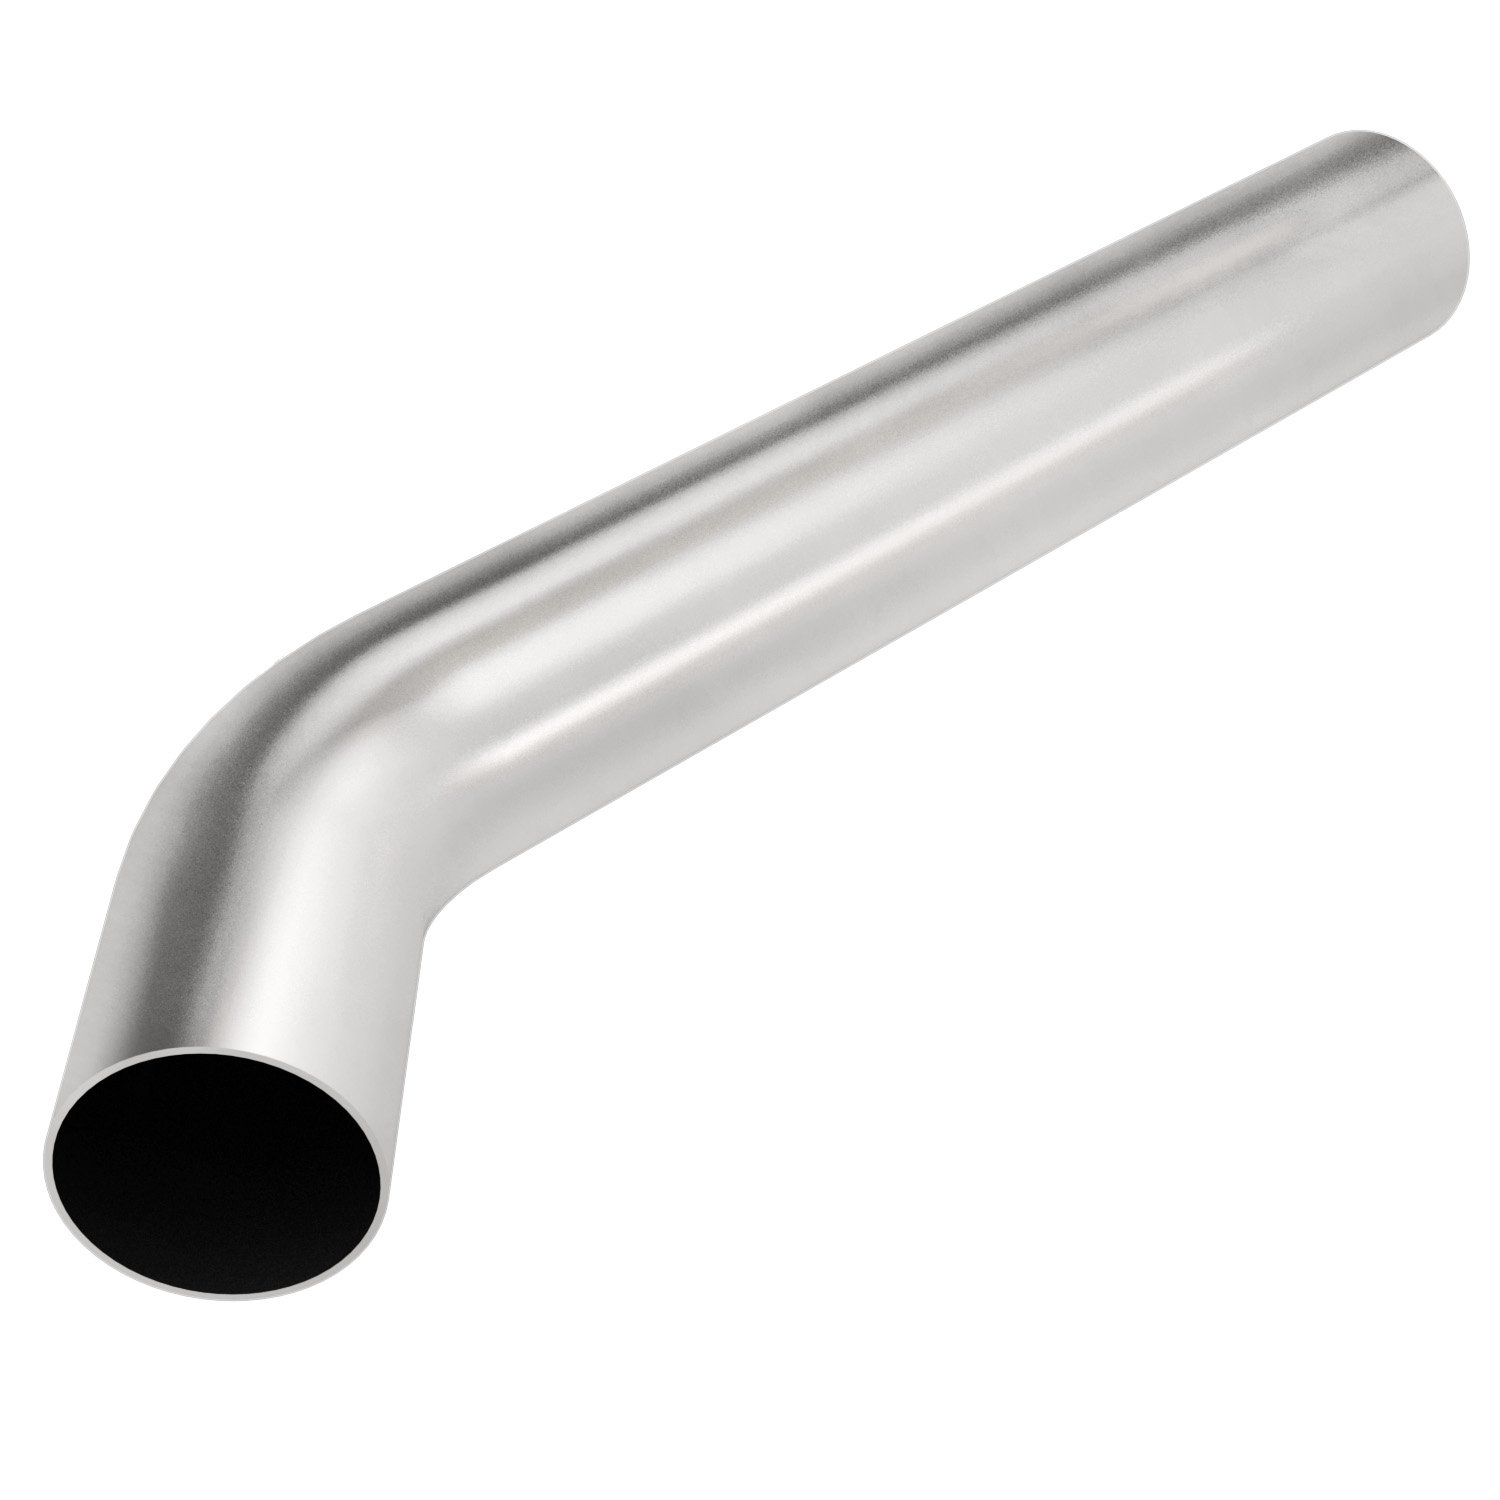 Stainless Steel 45° Transition Exhaust Pipes Outside Diameter: 3"